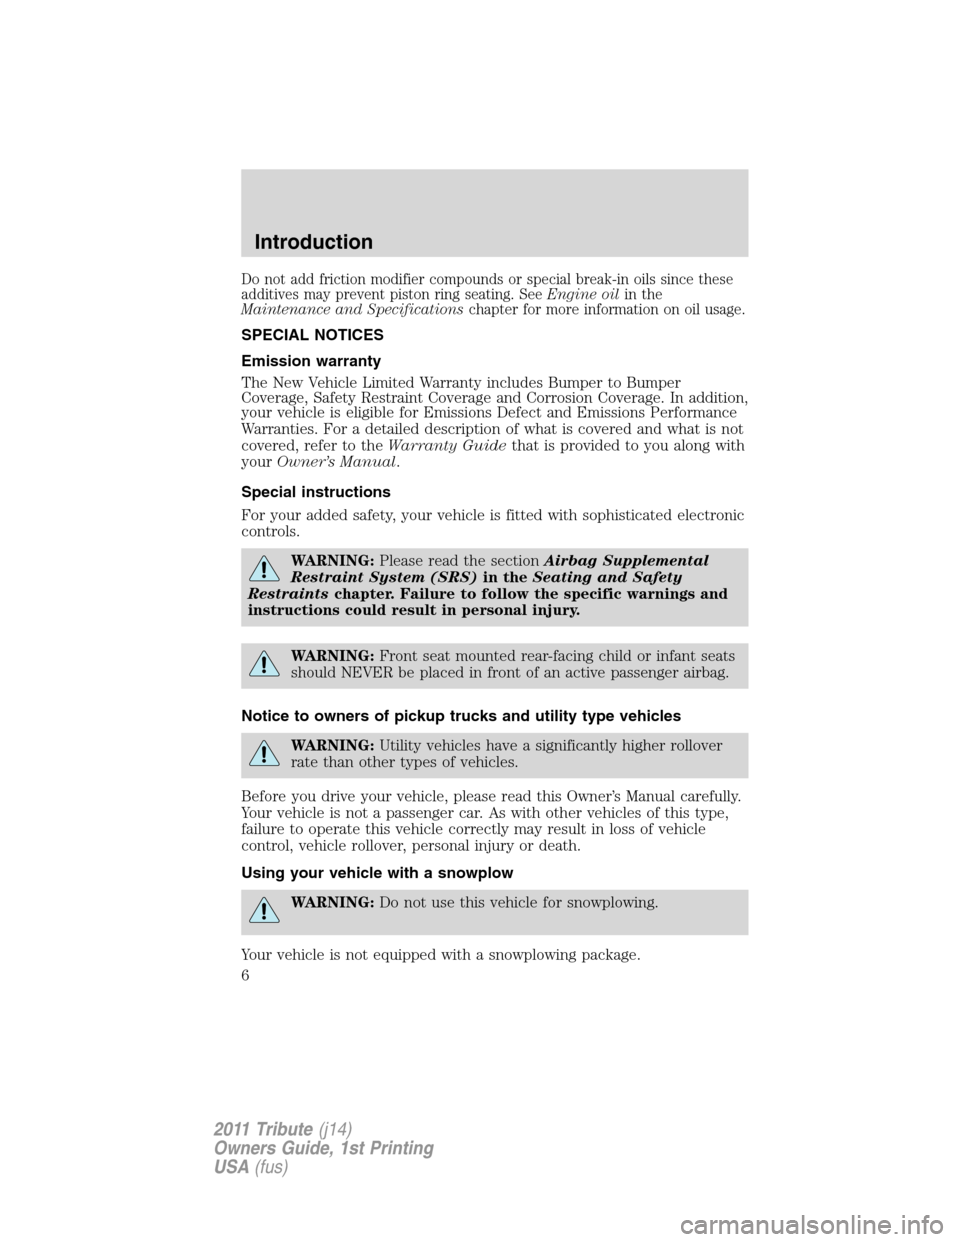 MAZDA MODEL TRIBUTE 2011  Owners Manual (in English) Do not add friction modifier compounds or special break-in oils since these
additives may prevent piston ring seating. SeeEngine oilin the
Maintenance and Specificationschapter for more information on